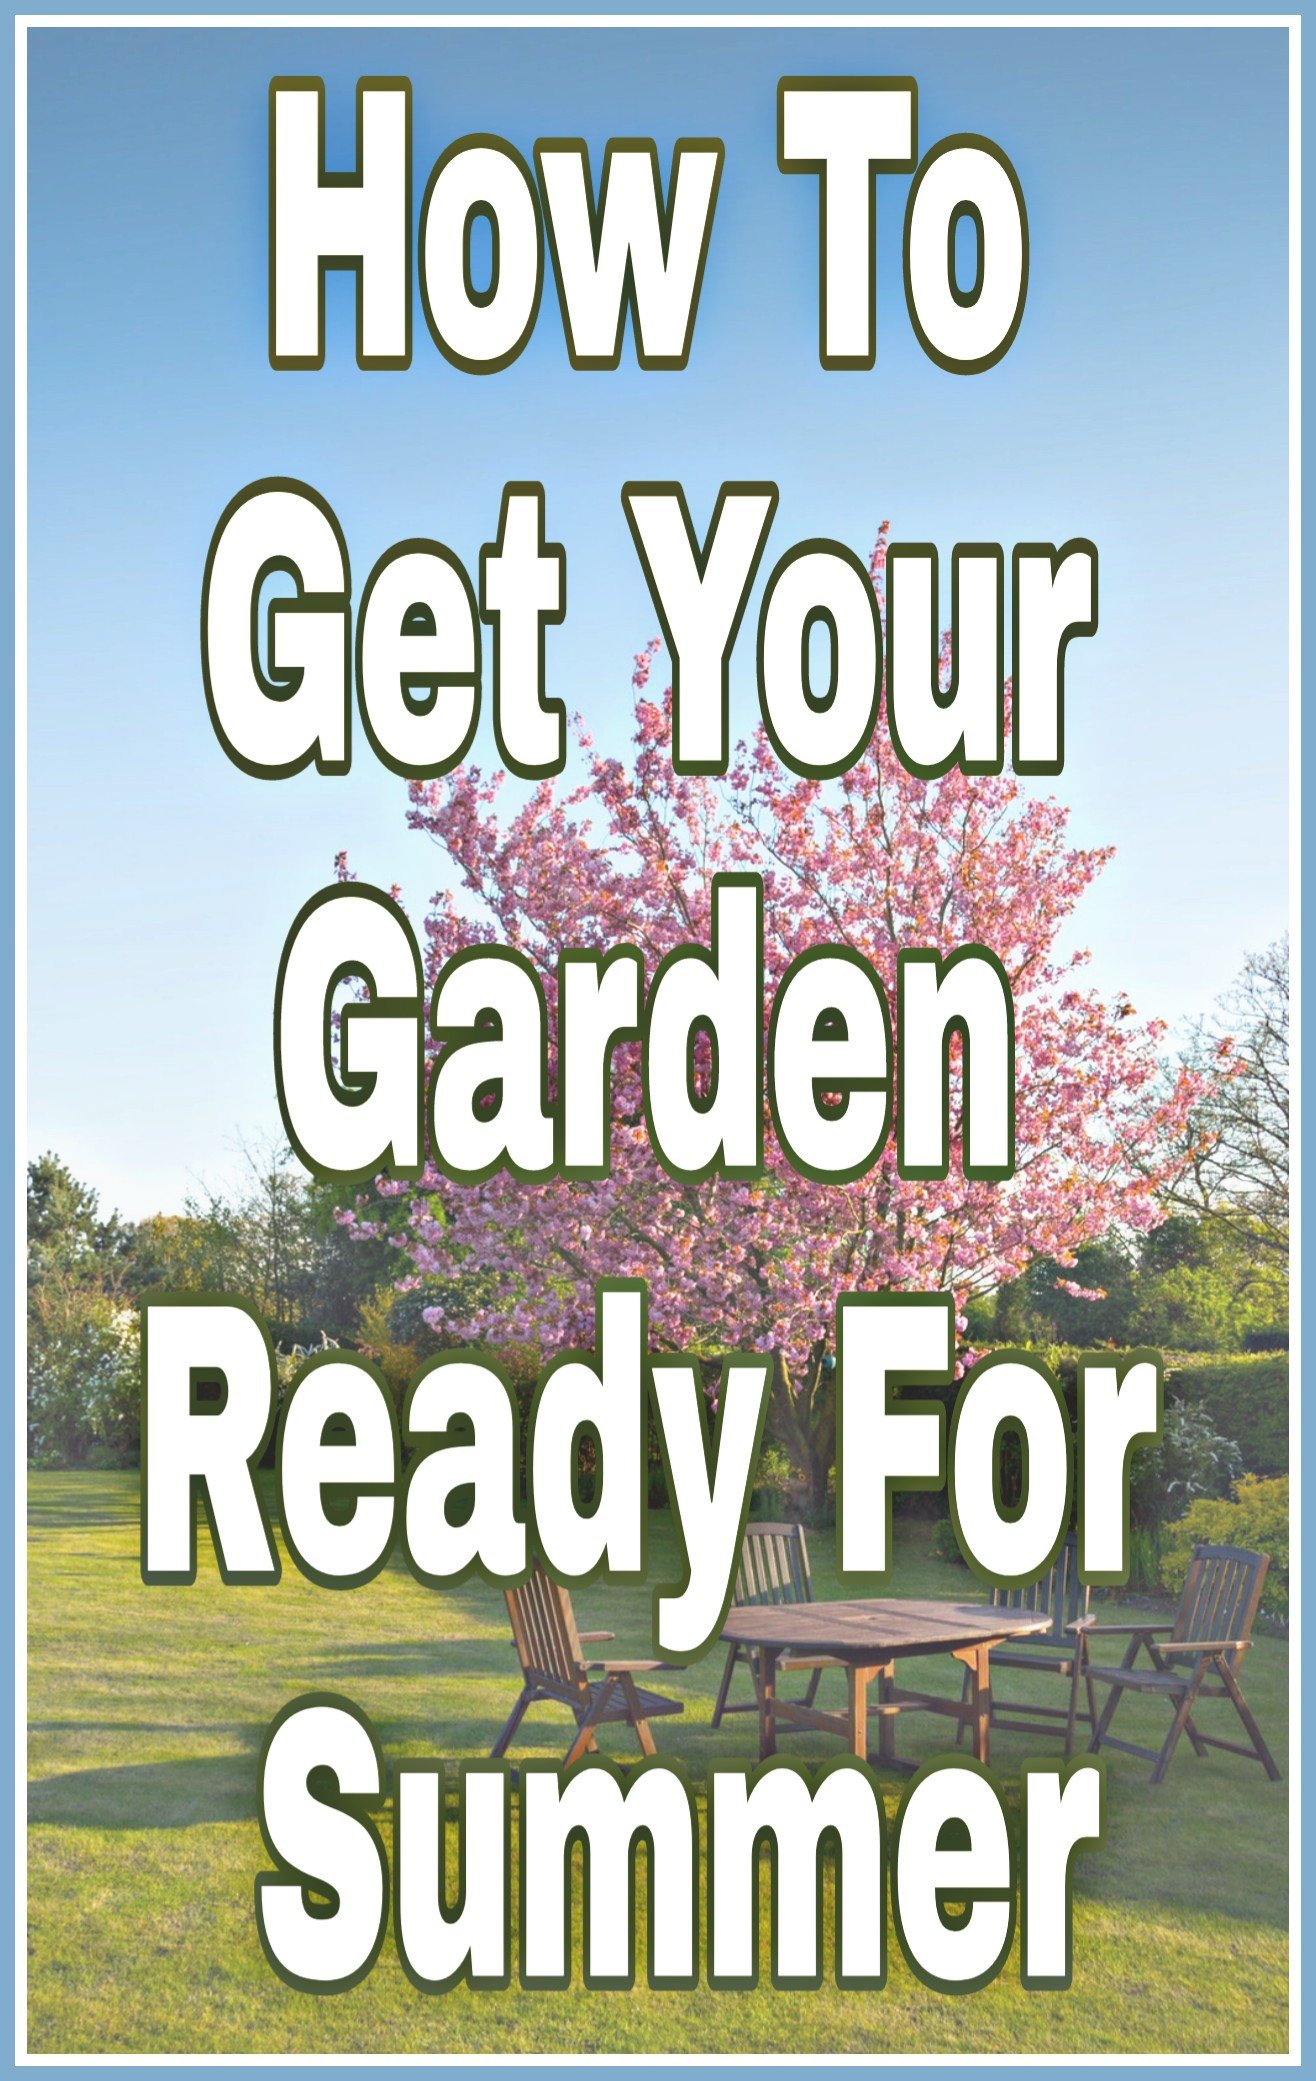 How To Get Your Garden Ready For Summer title with faded background image of garden